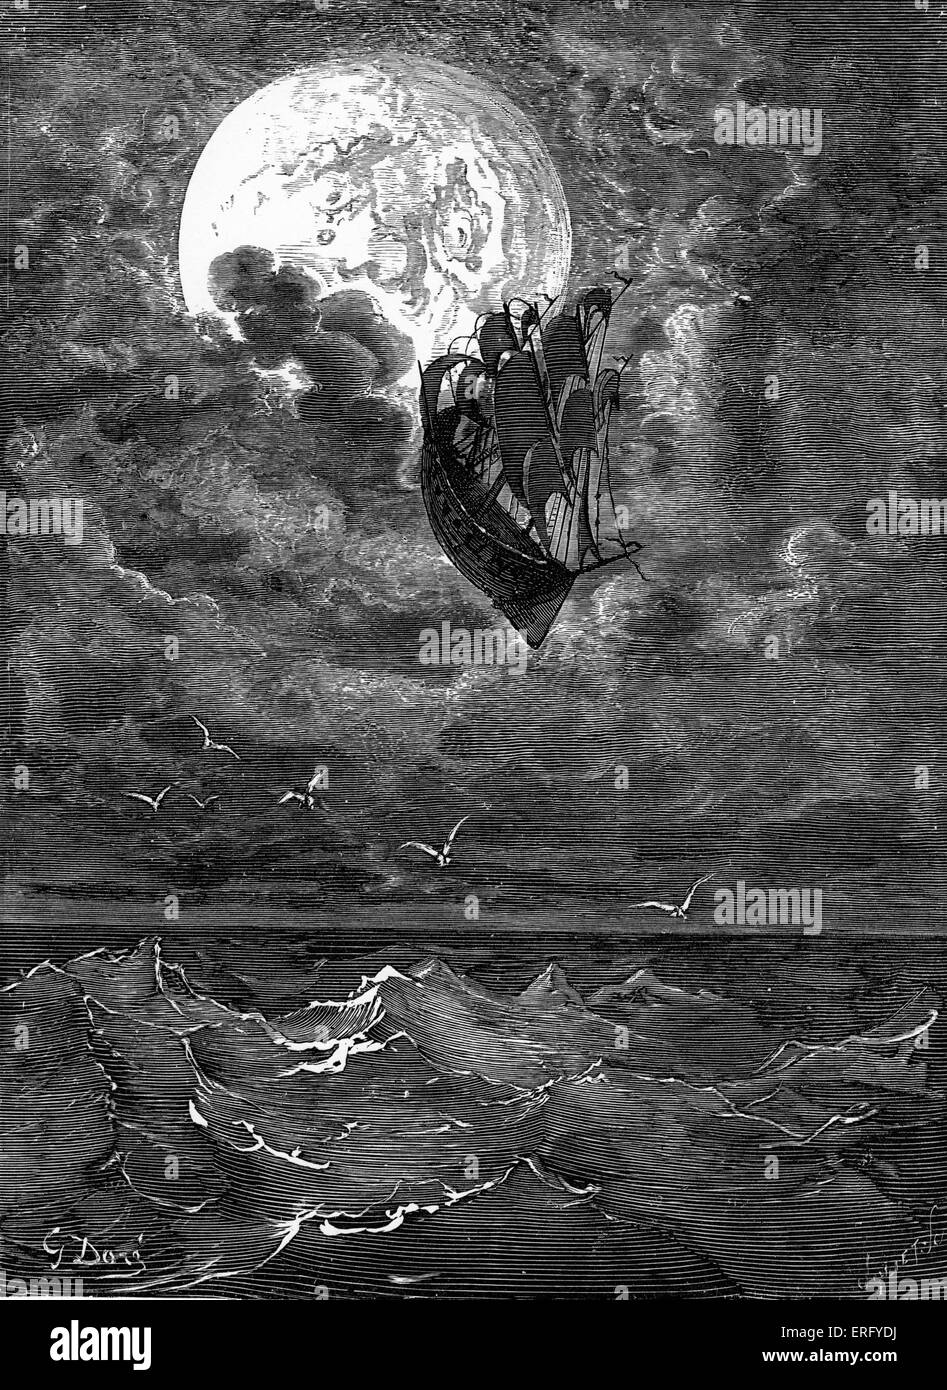 The Surprising Adventures of Baron Münchausen: Voyage to the moon, engraving by Gustave Doré. Baron Münchausen 's ship, swept up off the South Sea in a hurricane, travels on through the clouds to the moon. Drawn by Gustave Doré, French artist, b January 6, 1832 – January 23, 1883. Engraved by Joliet. Doré illustrated Théophile Gautier son 's French edition of The Surprising Adventures of Baron Münchausen, by Rudolf Erich Raspe, German writer, scientist and librarian, b 1736 - 1794. Stock Photo